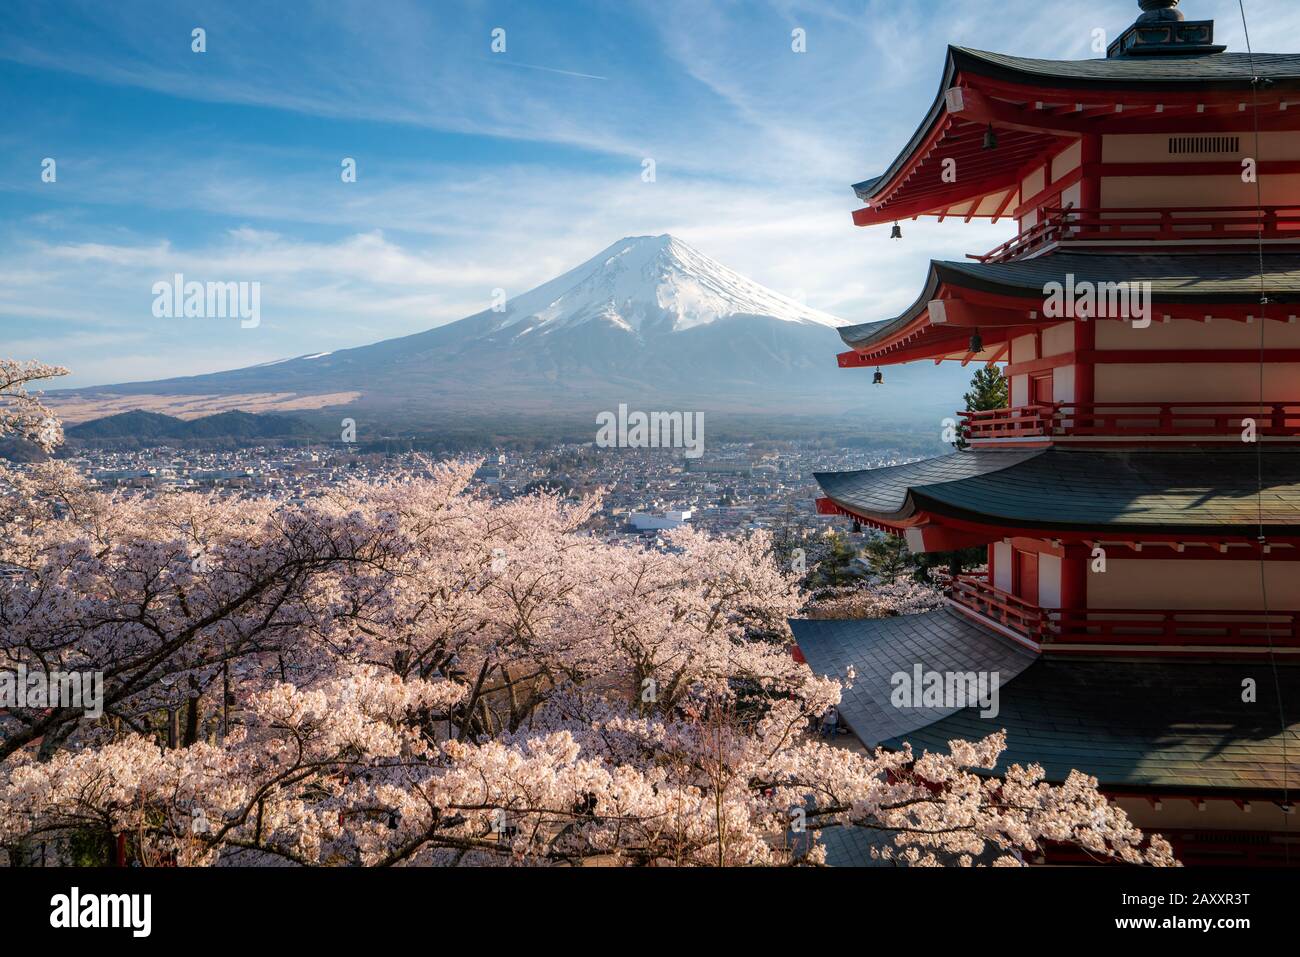 Fujiyoshida, Japan at Chureito Pagoda and Mt. Fuji in the spring with cherry blossoms full bloom during sunrise. Japan Landscape and nature travel, or Stock Photo